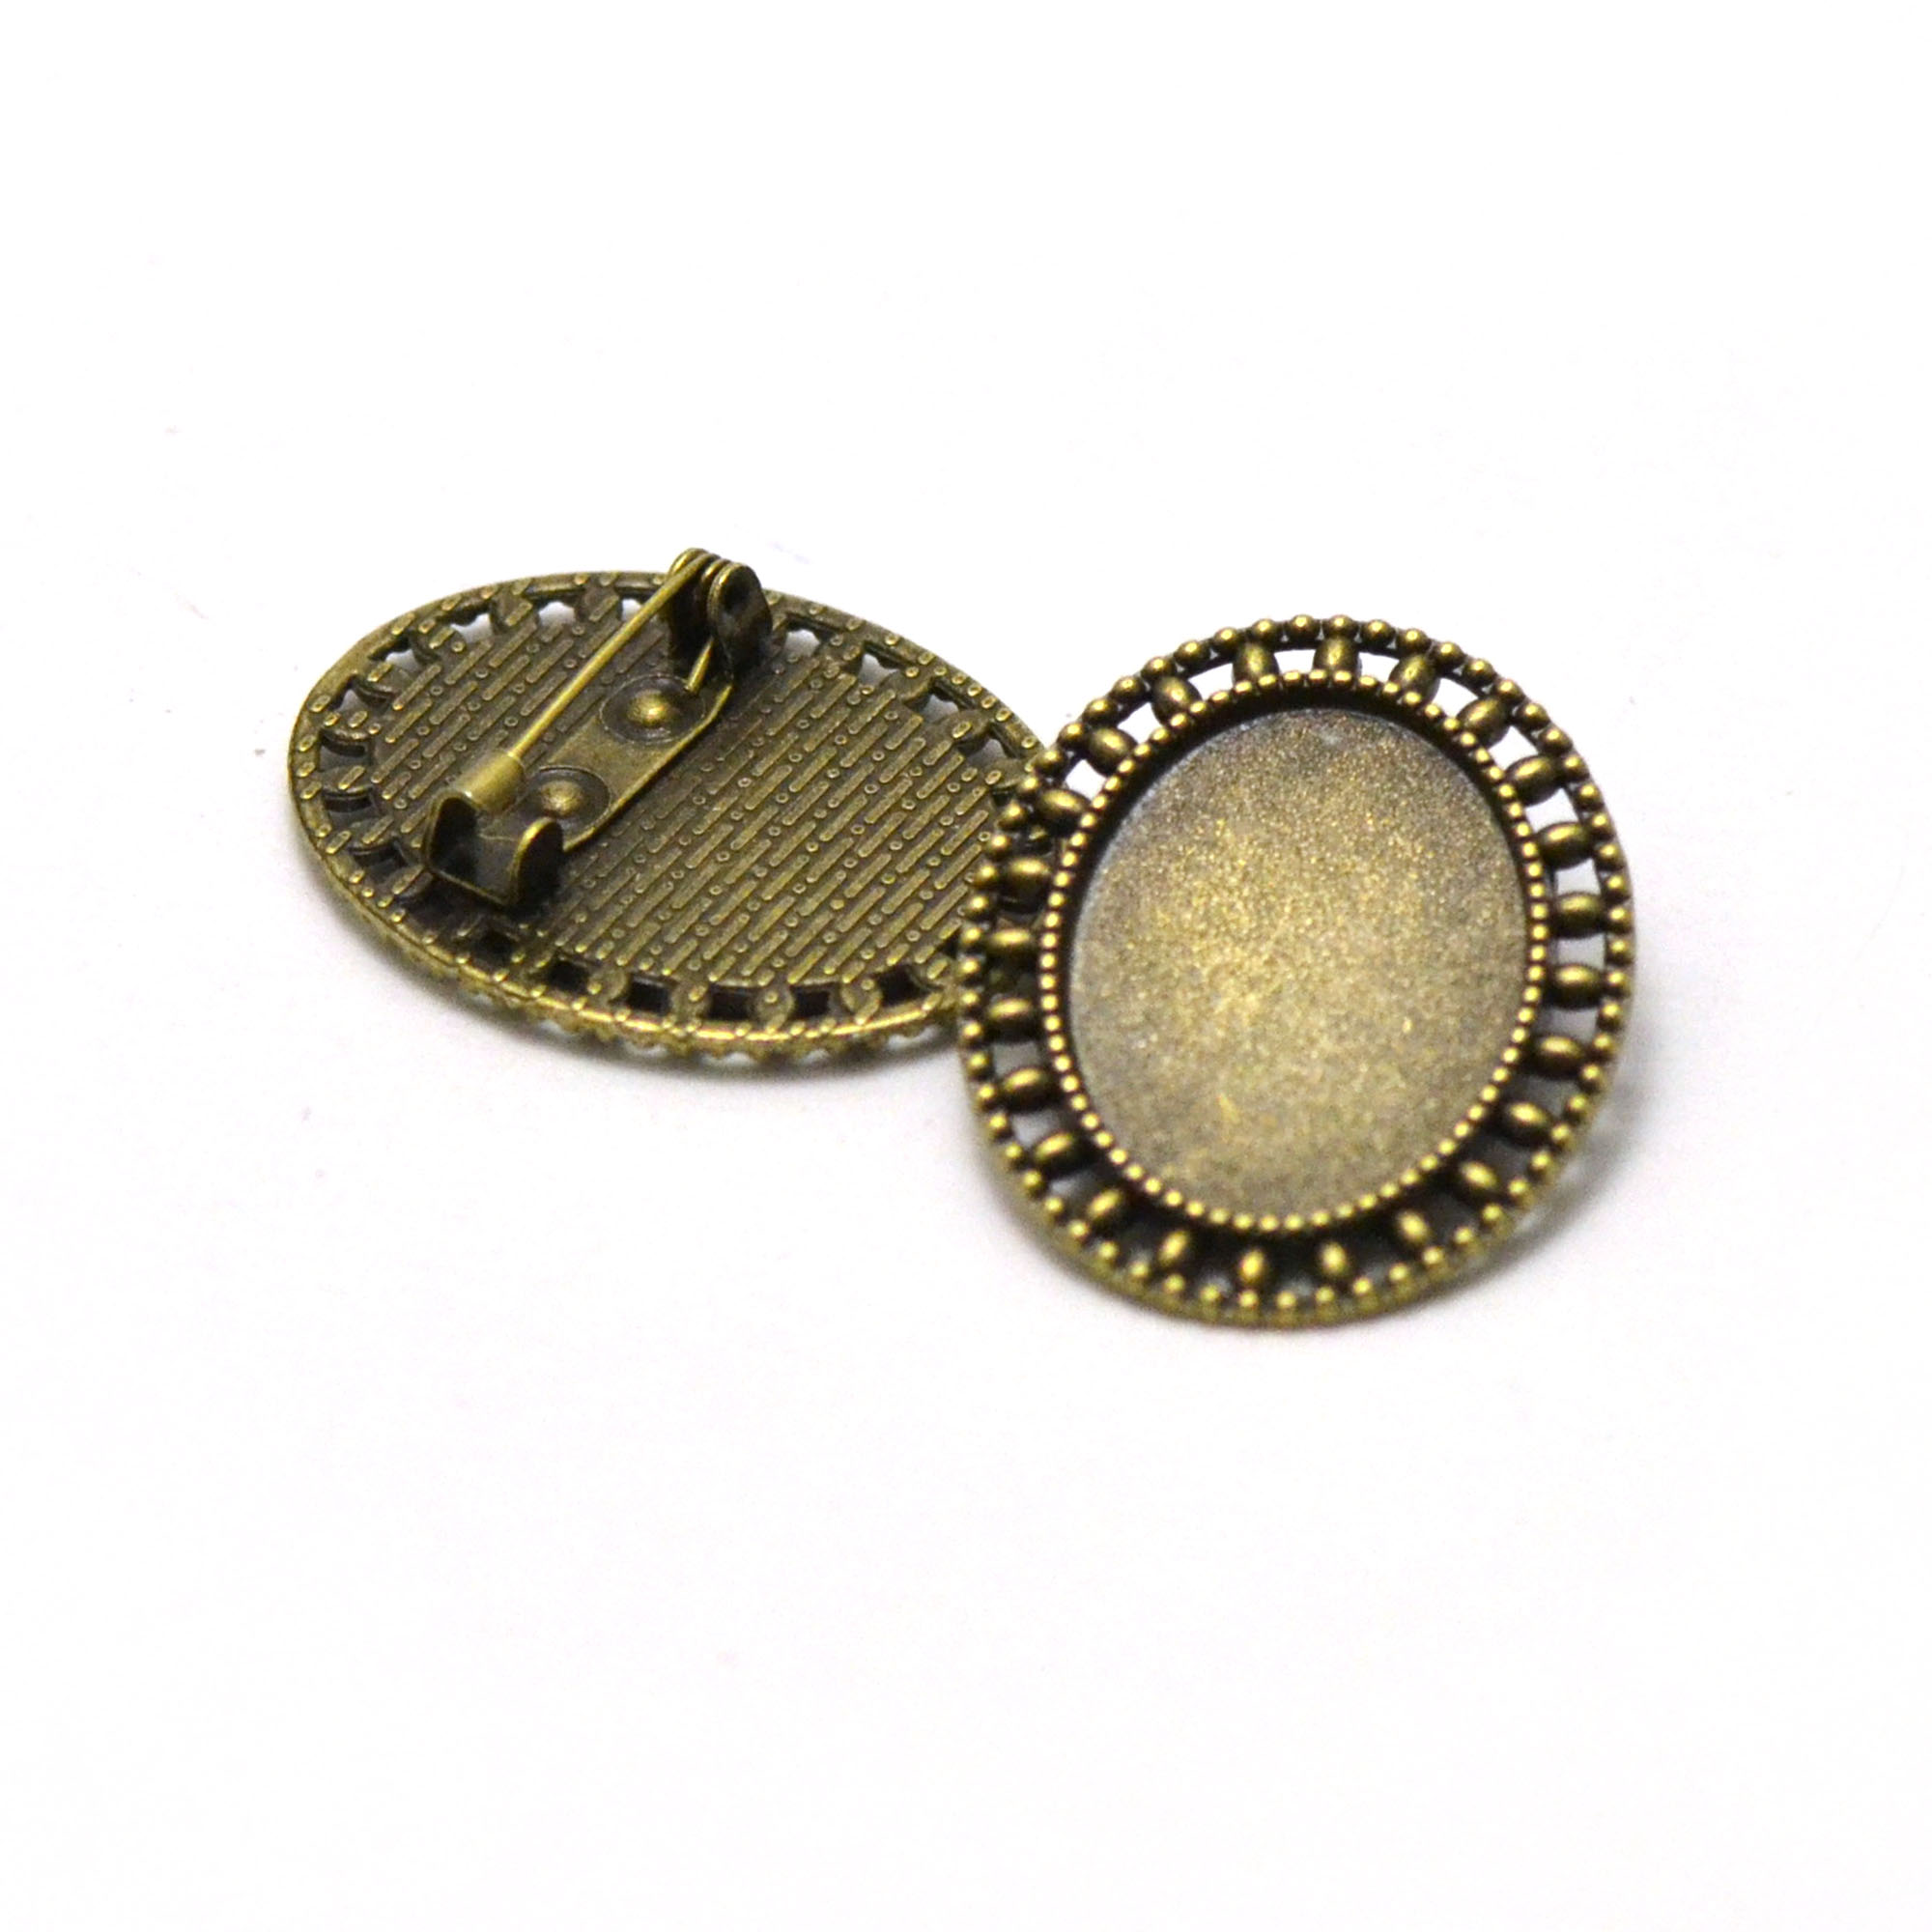 2 broches support cabochon ovale 25x18 mm, bronze 08